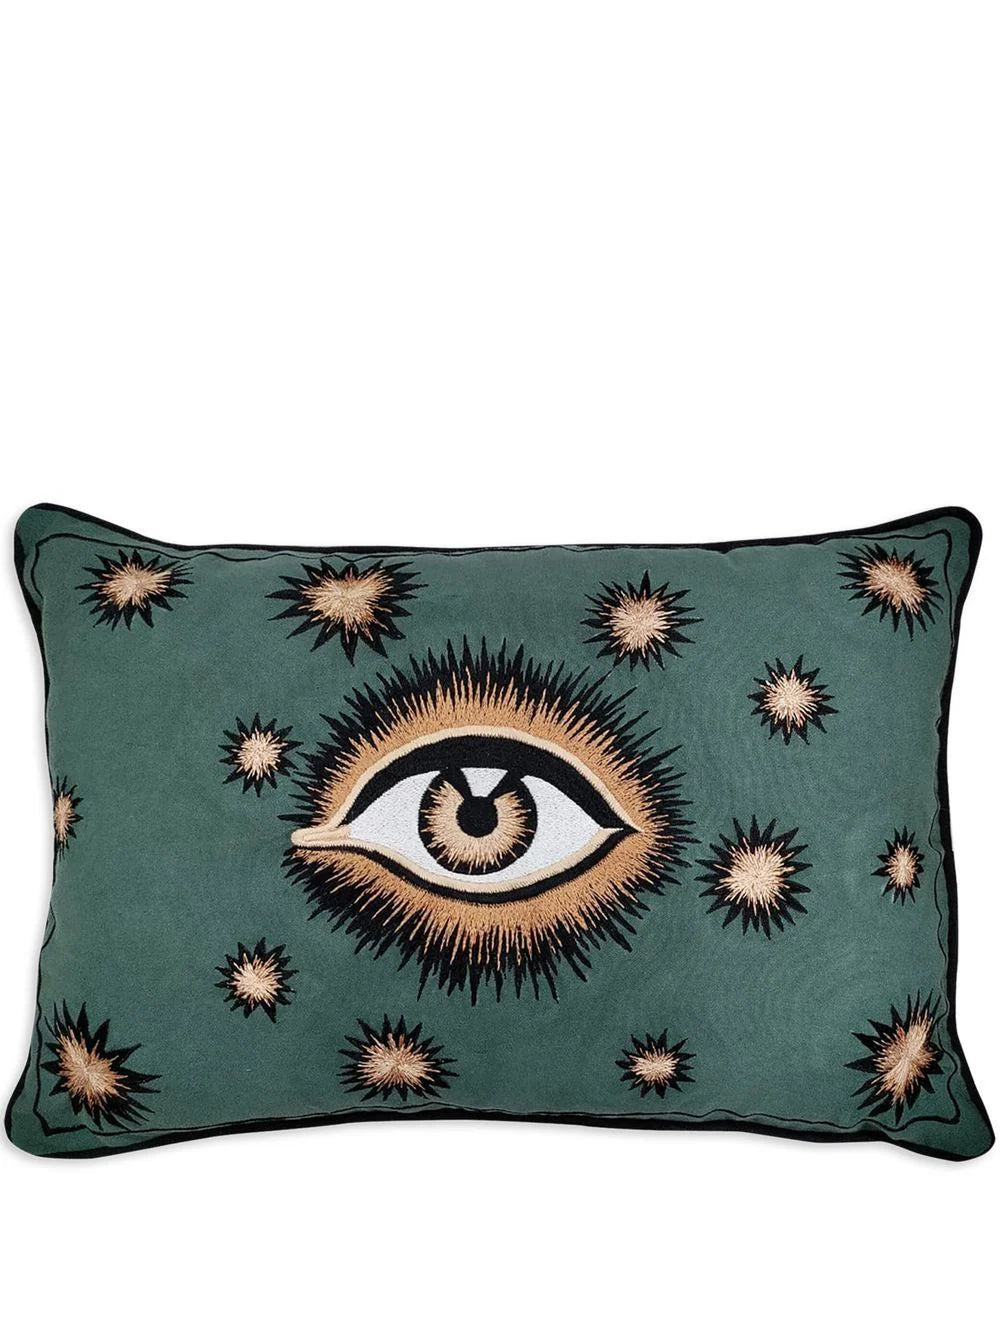 A green velvet cushion with a large embroidered eye motif in the centre, surrounded by black and gold starbusts and finished with a black piped edge. 